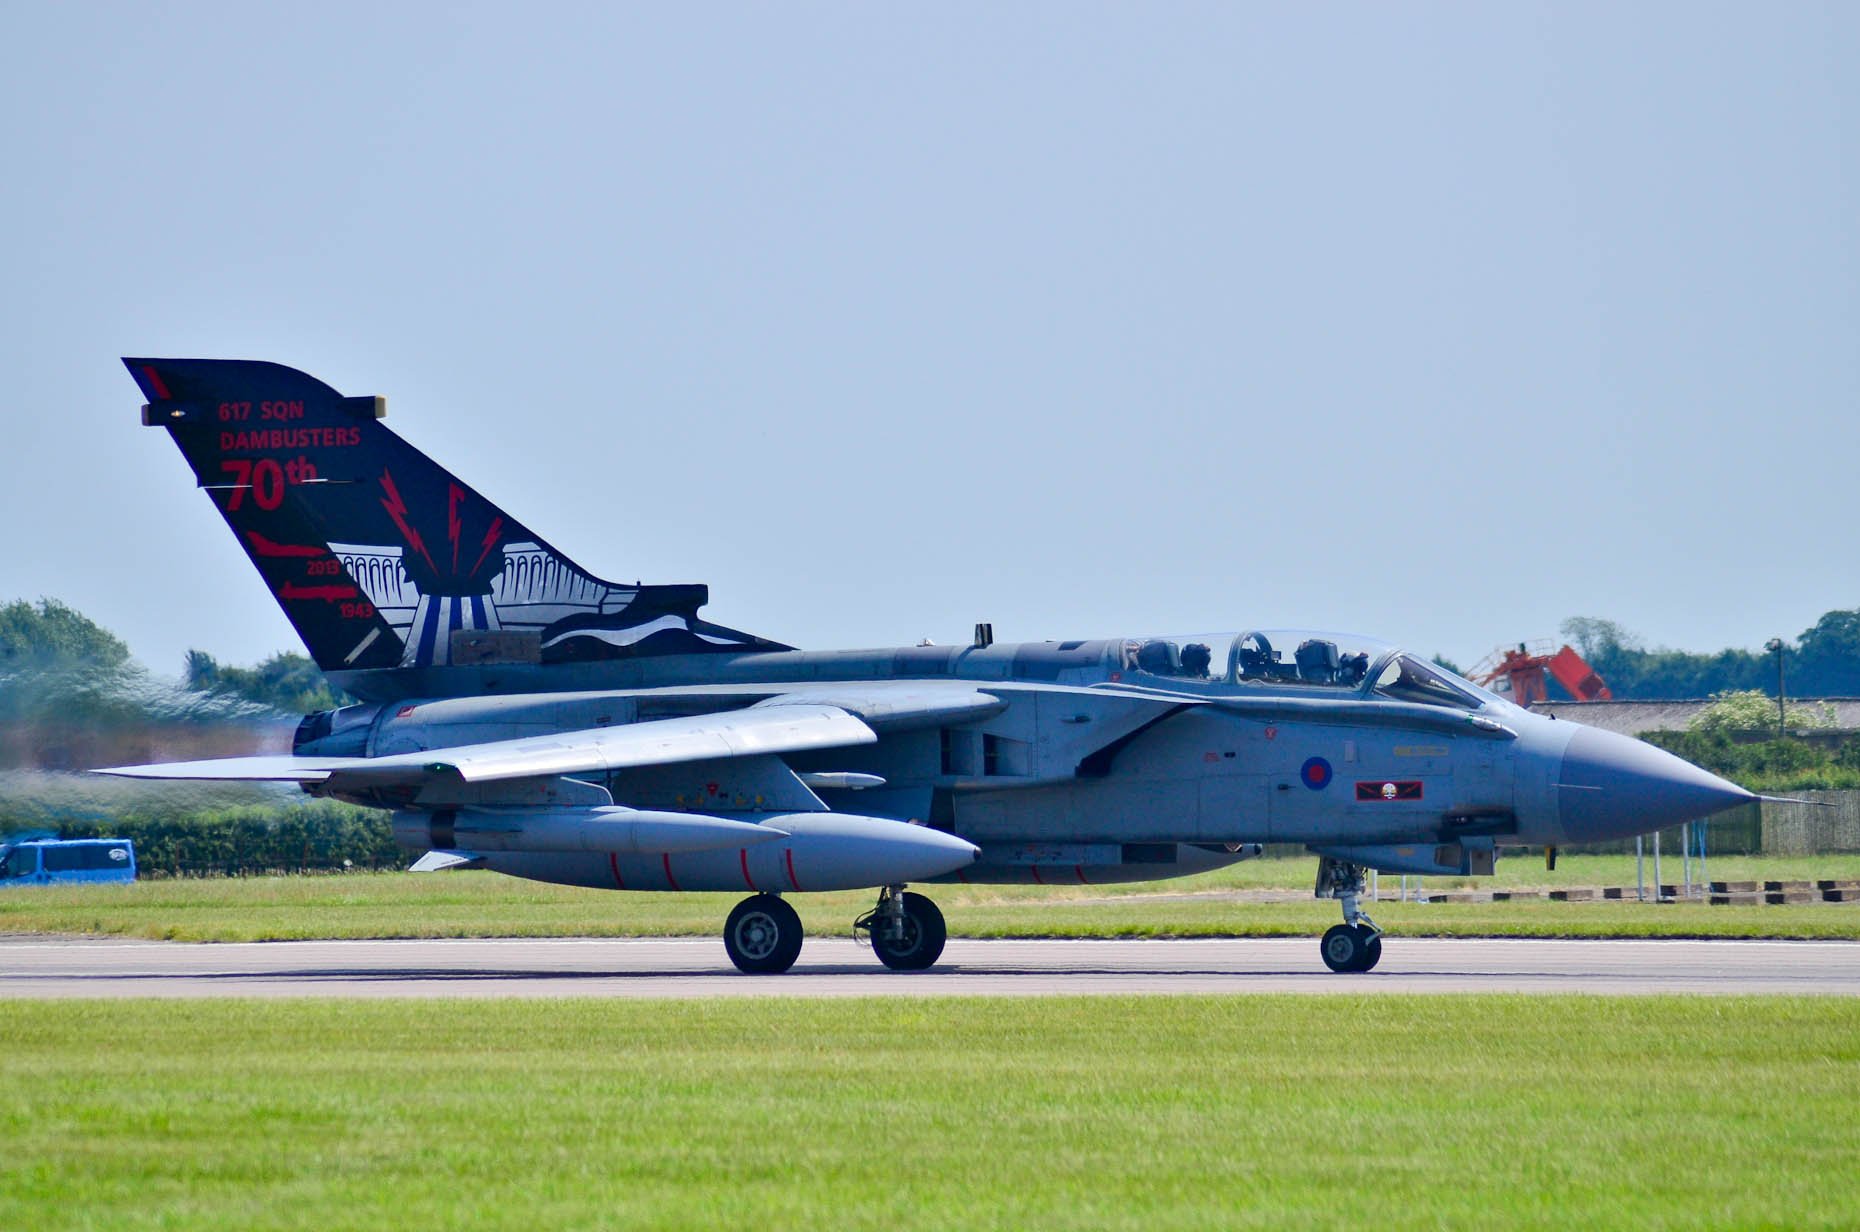 The Tornado GR-4 from 617 Squadron takes off to commemorate the 70th anniversary of the Dambusters raid in the Battle of Britain Memorial Flight. Photo: Steve Smailes for The Lincolnite